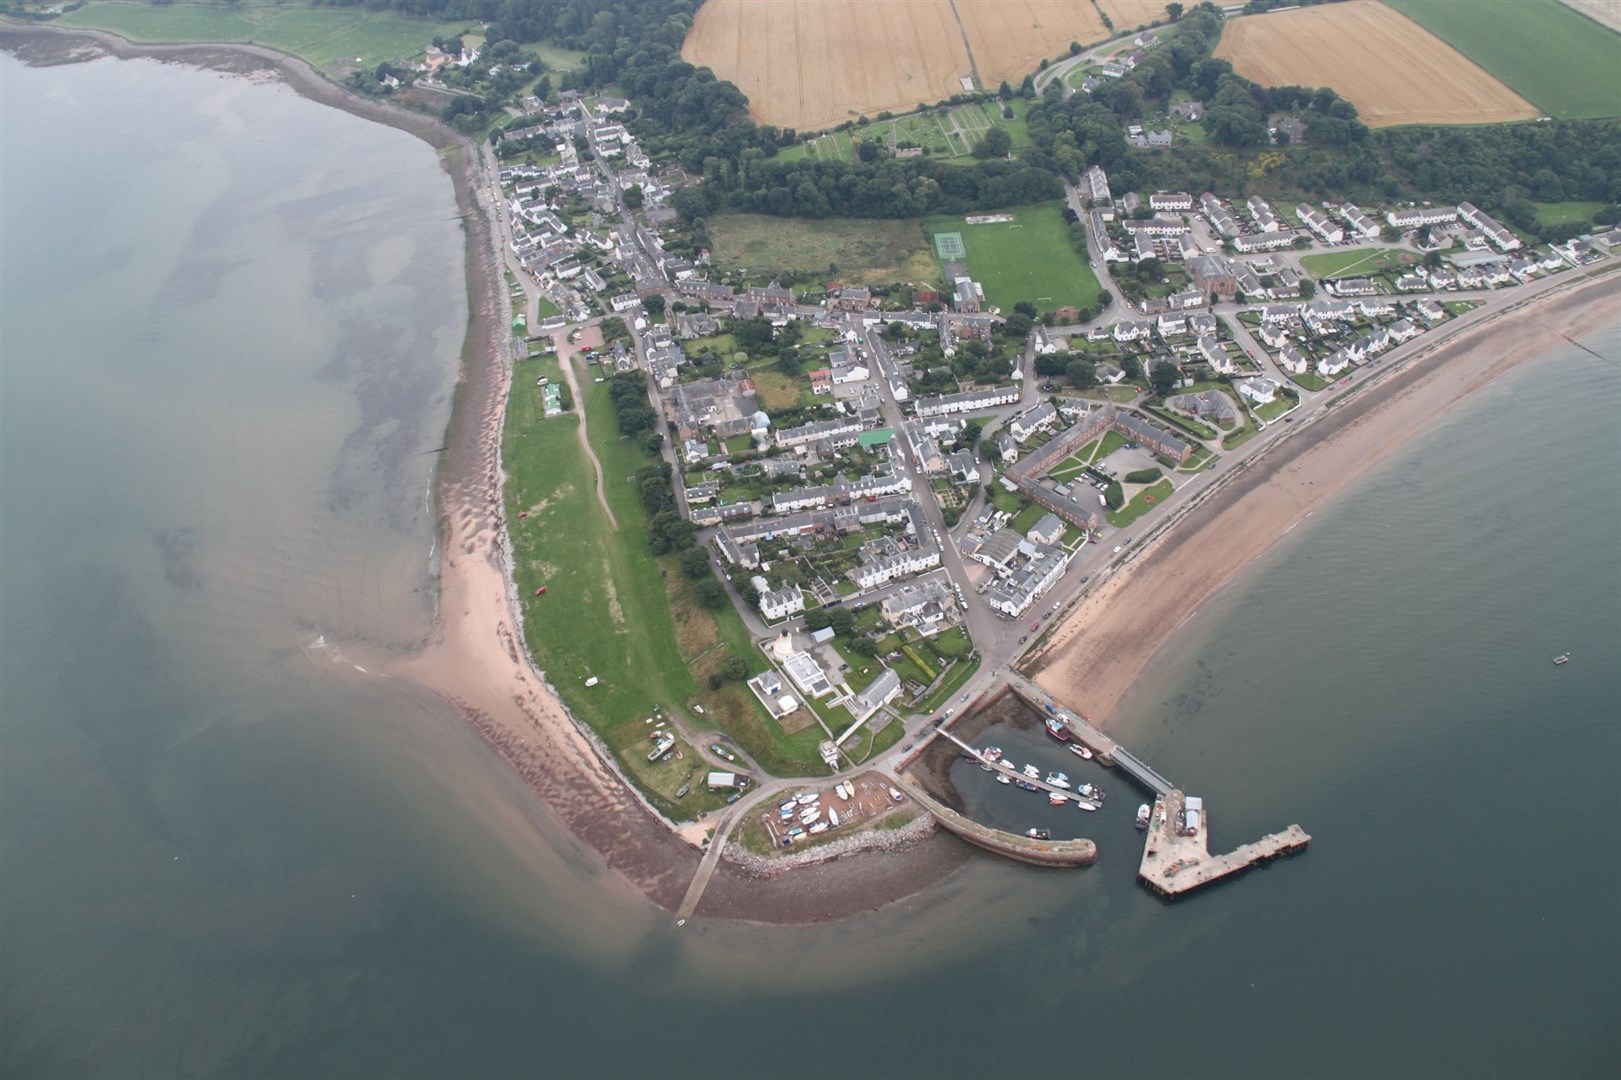 Cromarty from the air. The planned motorhome site aims to ease pressure from visitors on the links. Picture: Graeme Smith, via Wikimedia Commons.